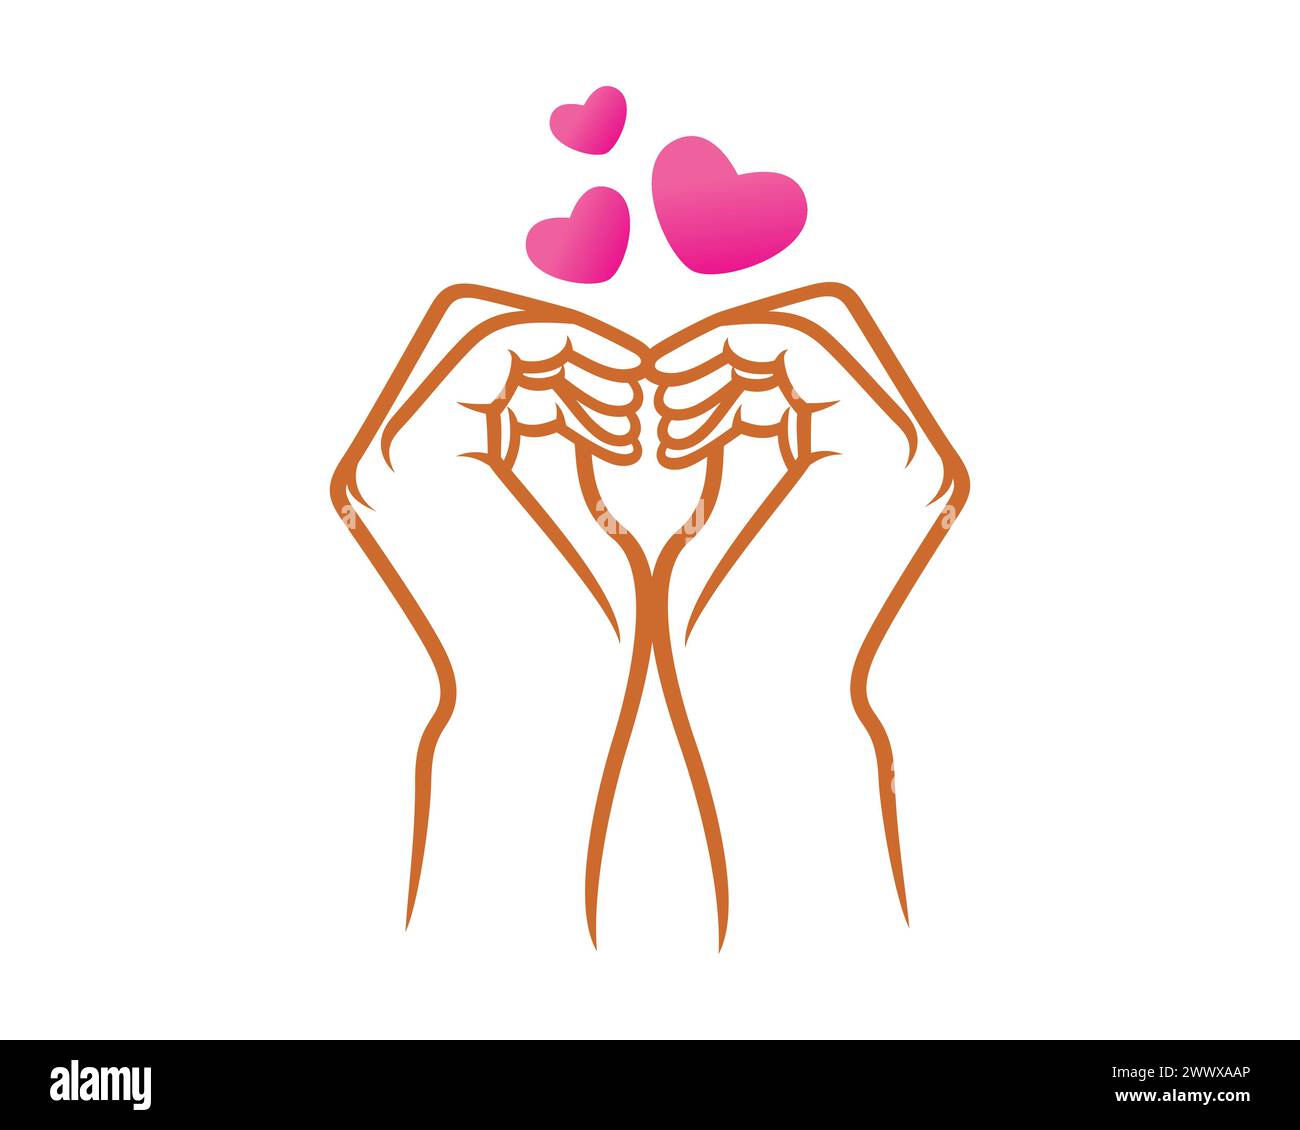 Love Hand Sign with Softly Pressed Gesture Illustration Stock Vector